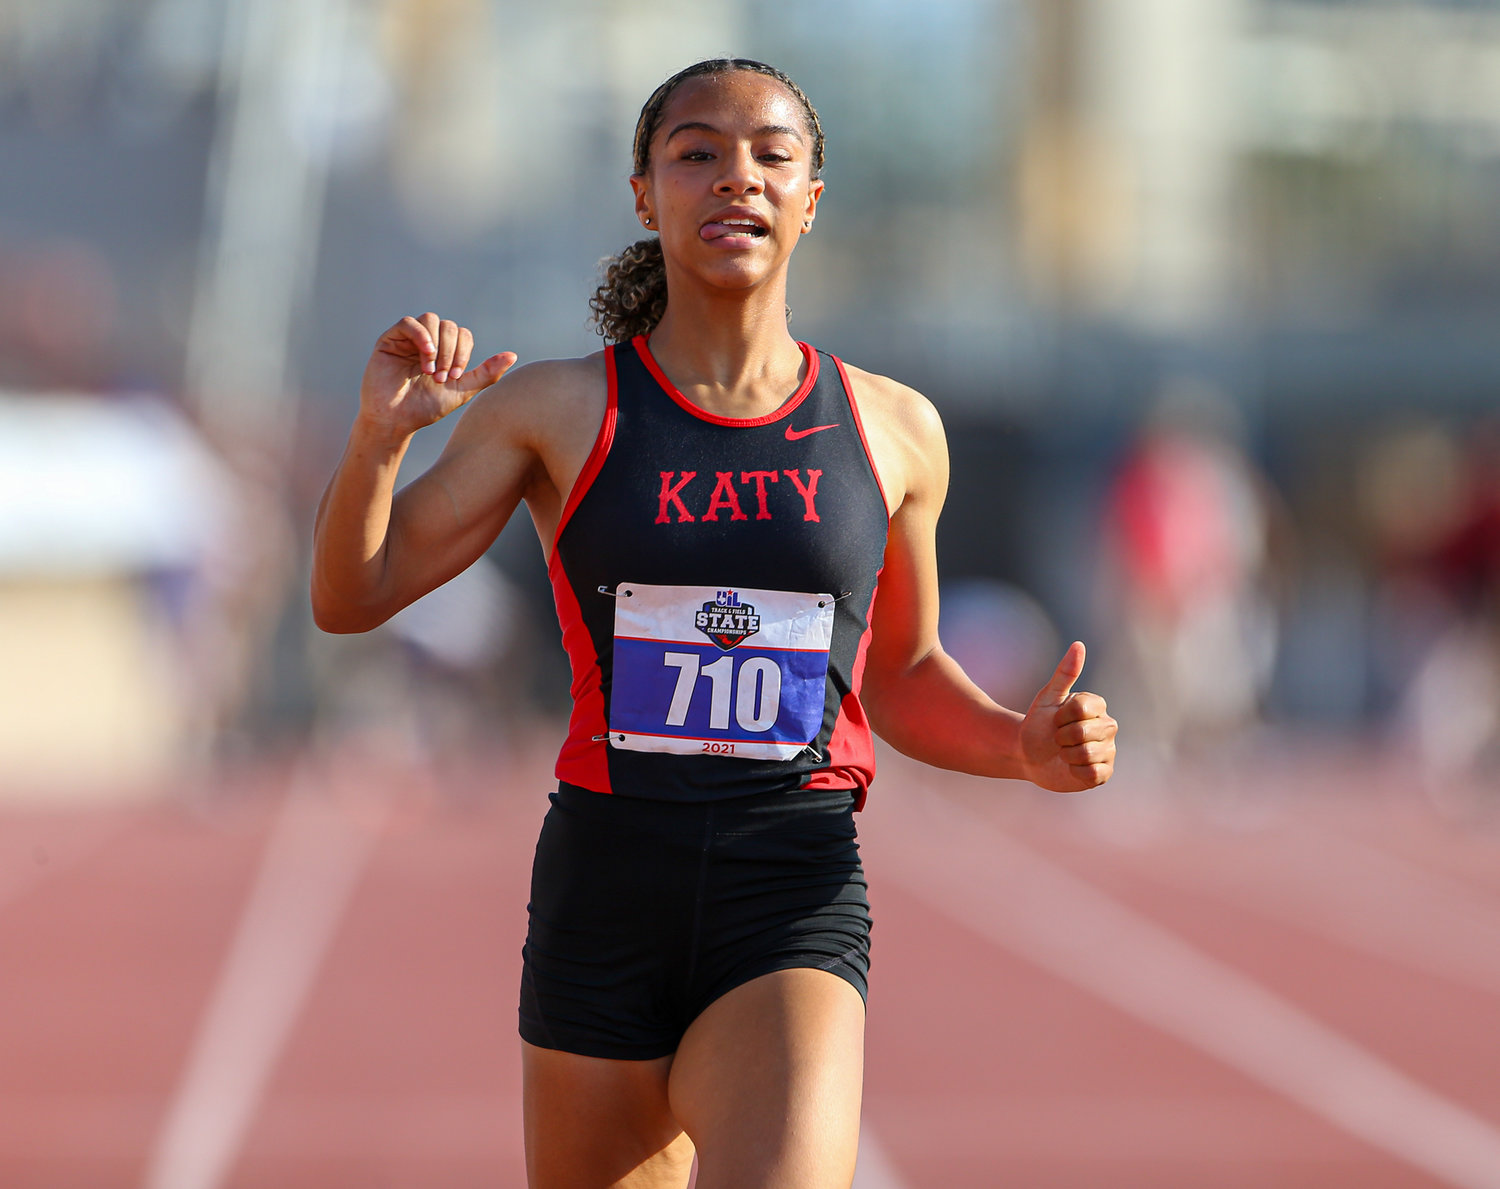 Jada Campos of Katy High School runs in the Class 6A girls 100-meter dash at the UIL State Track and Field Meet on May 8, 2021 at Mike A. Myers Stadium in Austin, Texas.